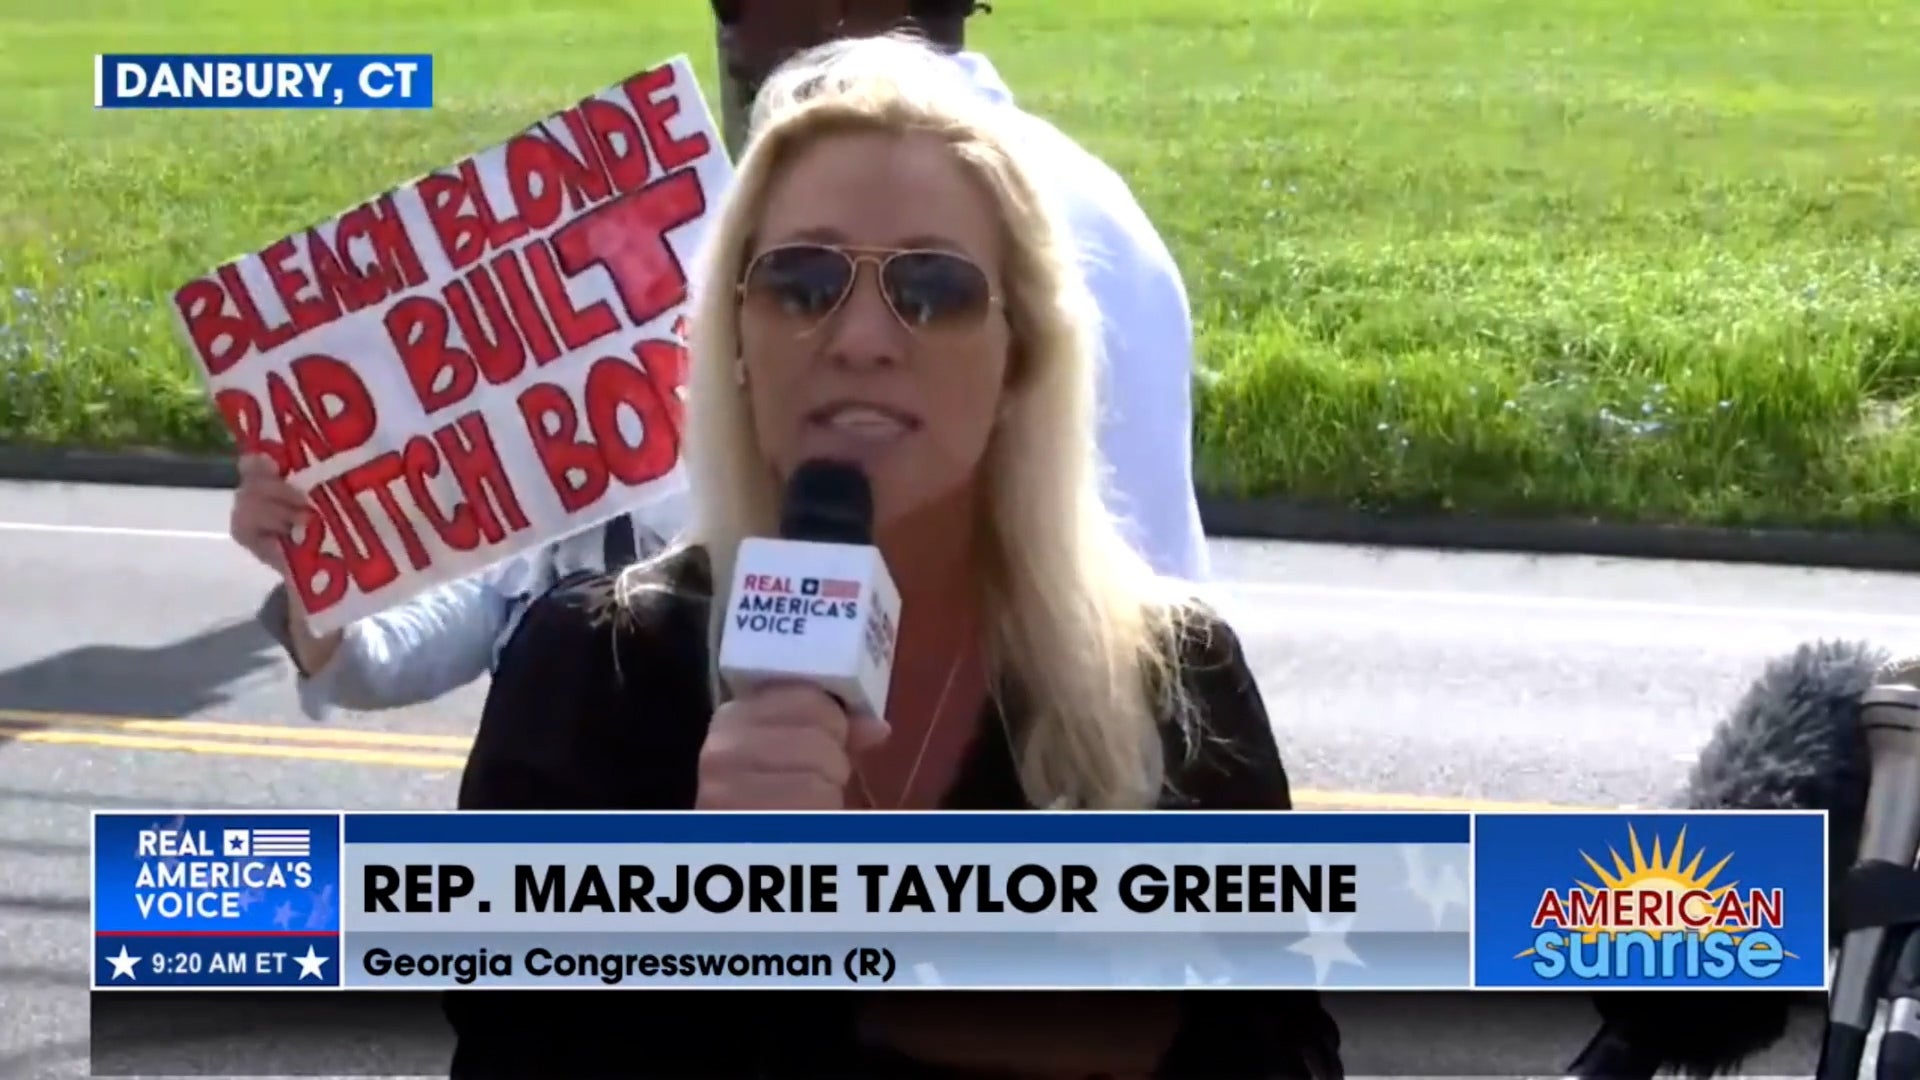 Majorie Taylor Greene speaks outside a Danbury, Connecticut, prison as Steve Bannon turns himself in. A protestor held up a sign mocking the Georgia representative during her TV appearance